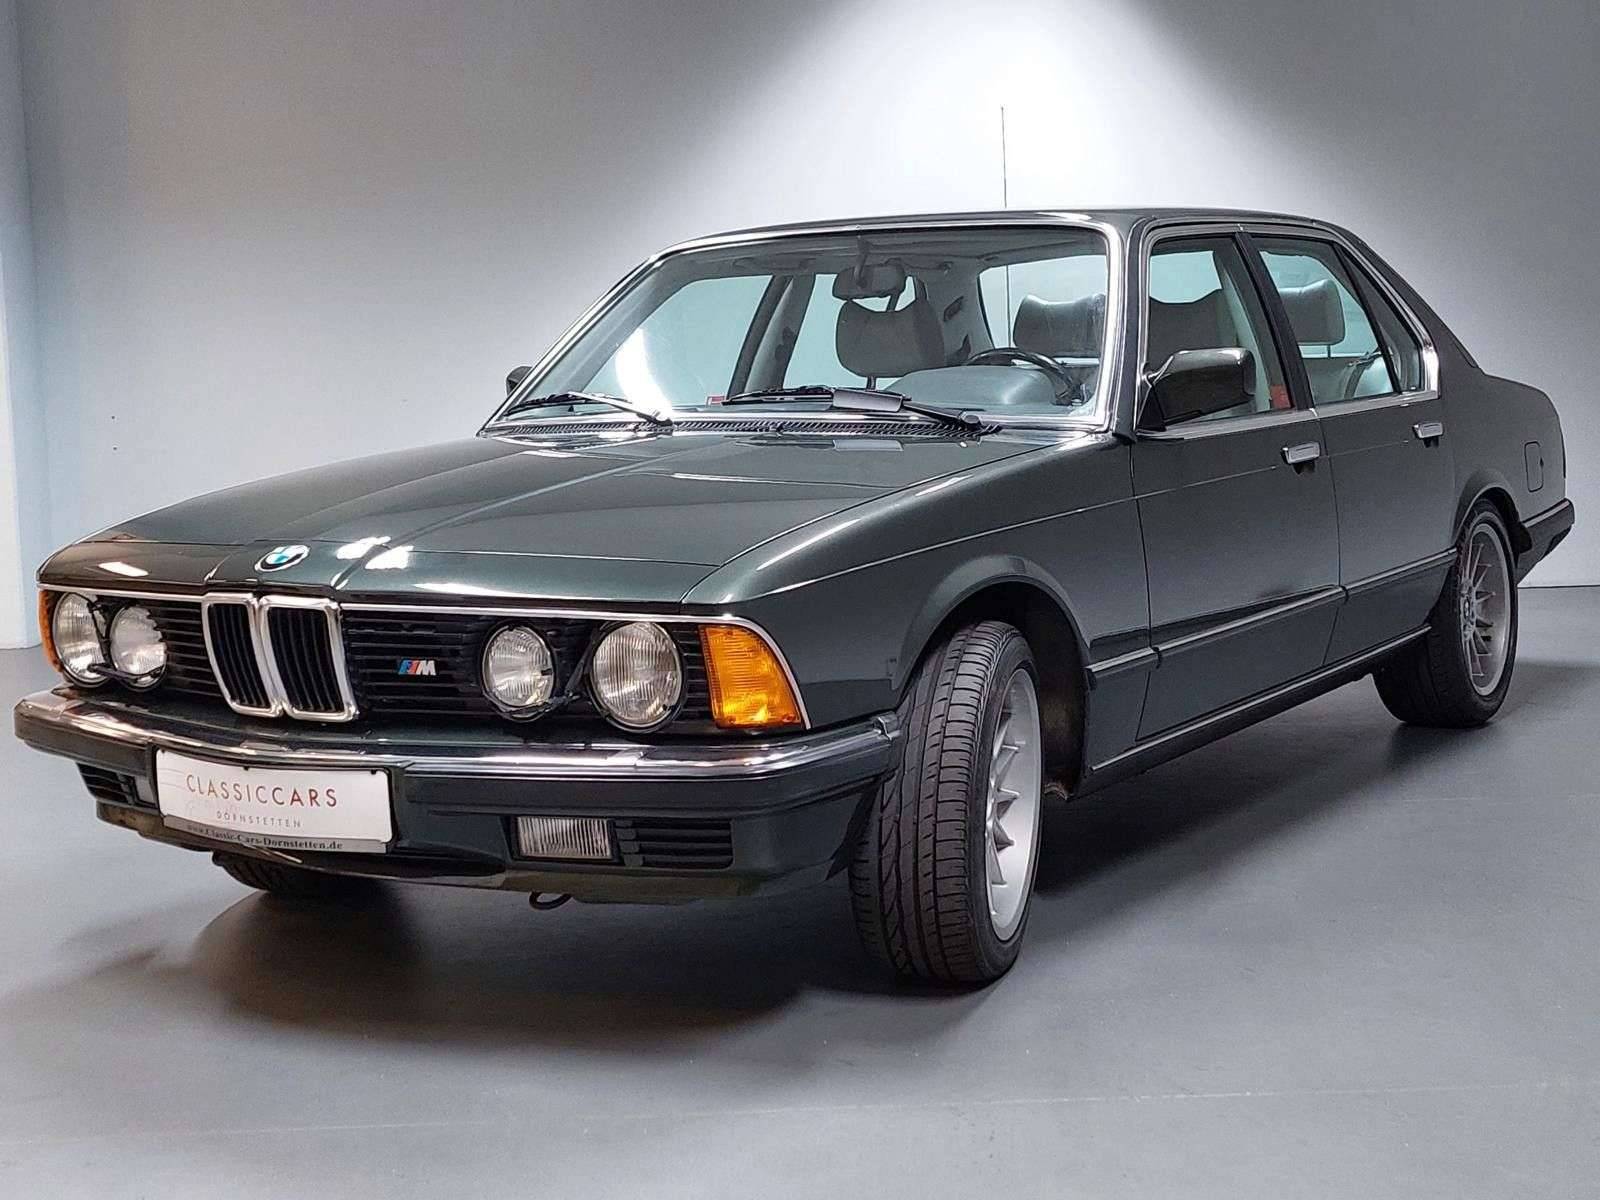 BMW 7 Series Classic Cars for Sale - Classic Trader